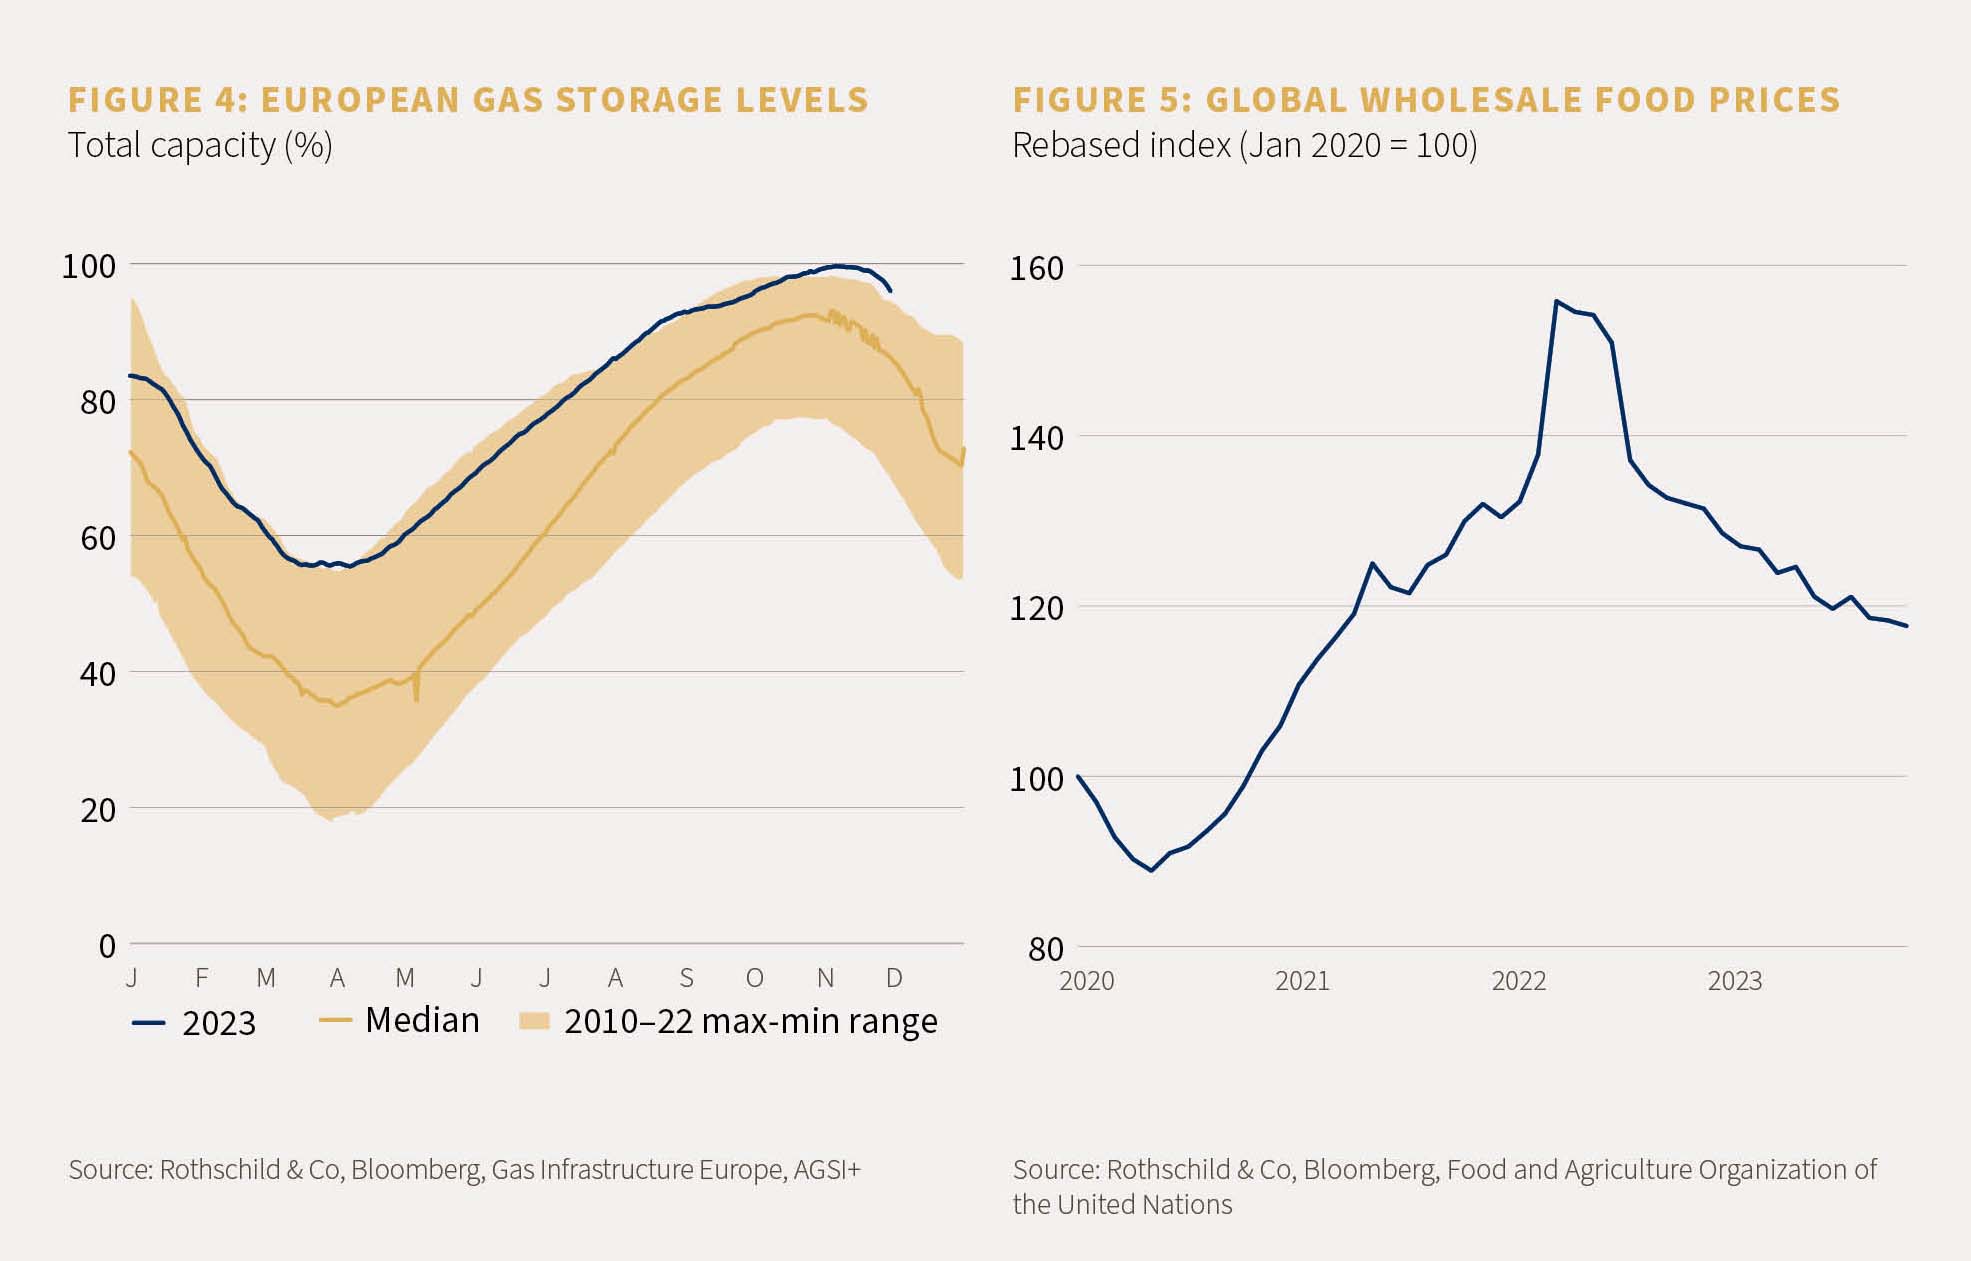 Figure 4 shows european gas storage levels as a percentage of total capacity across 2023. Figure 5 shows global wholesale food prices.